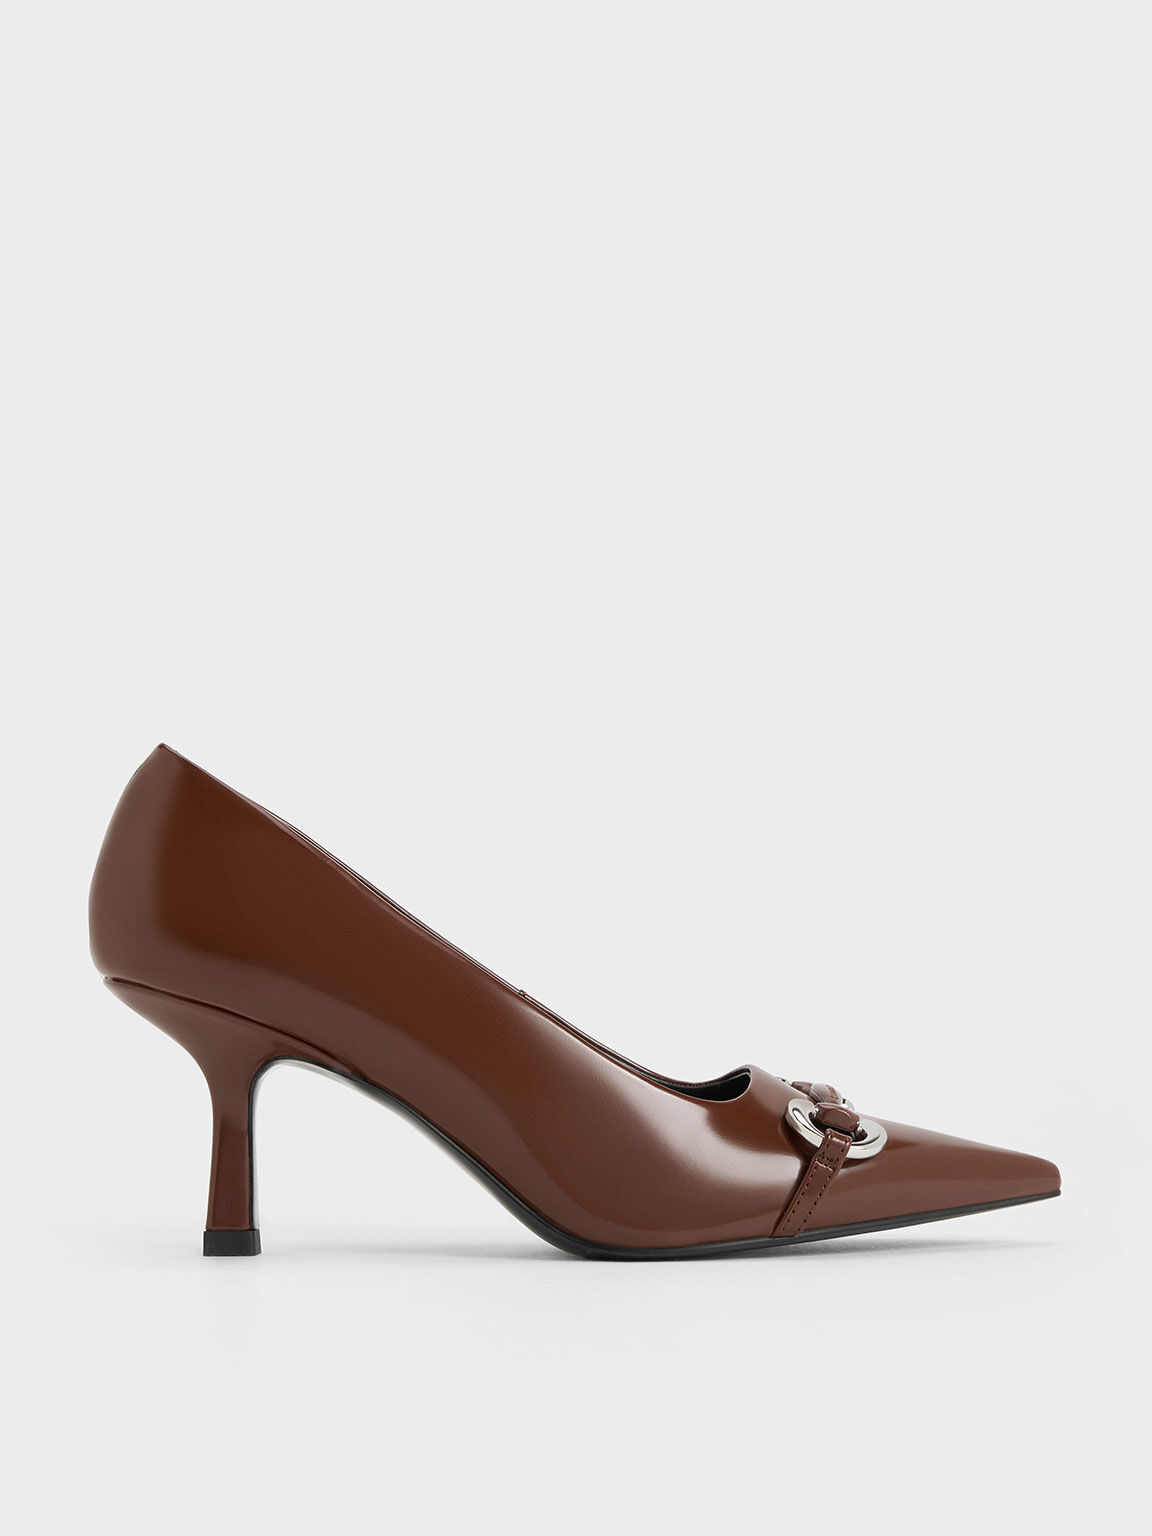 Brown pumps on a Campbell low heel - KeeShoes